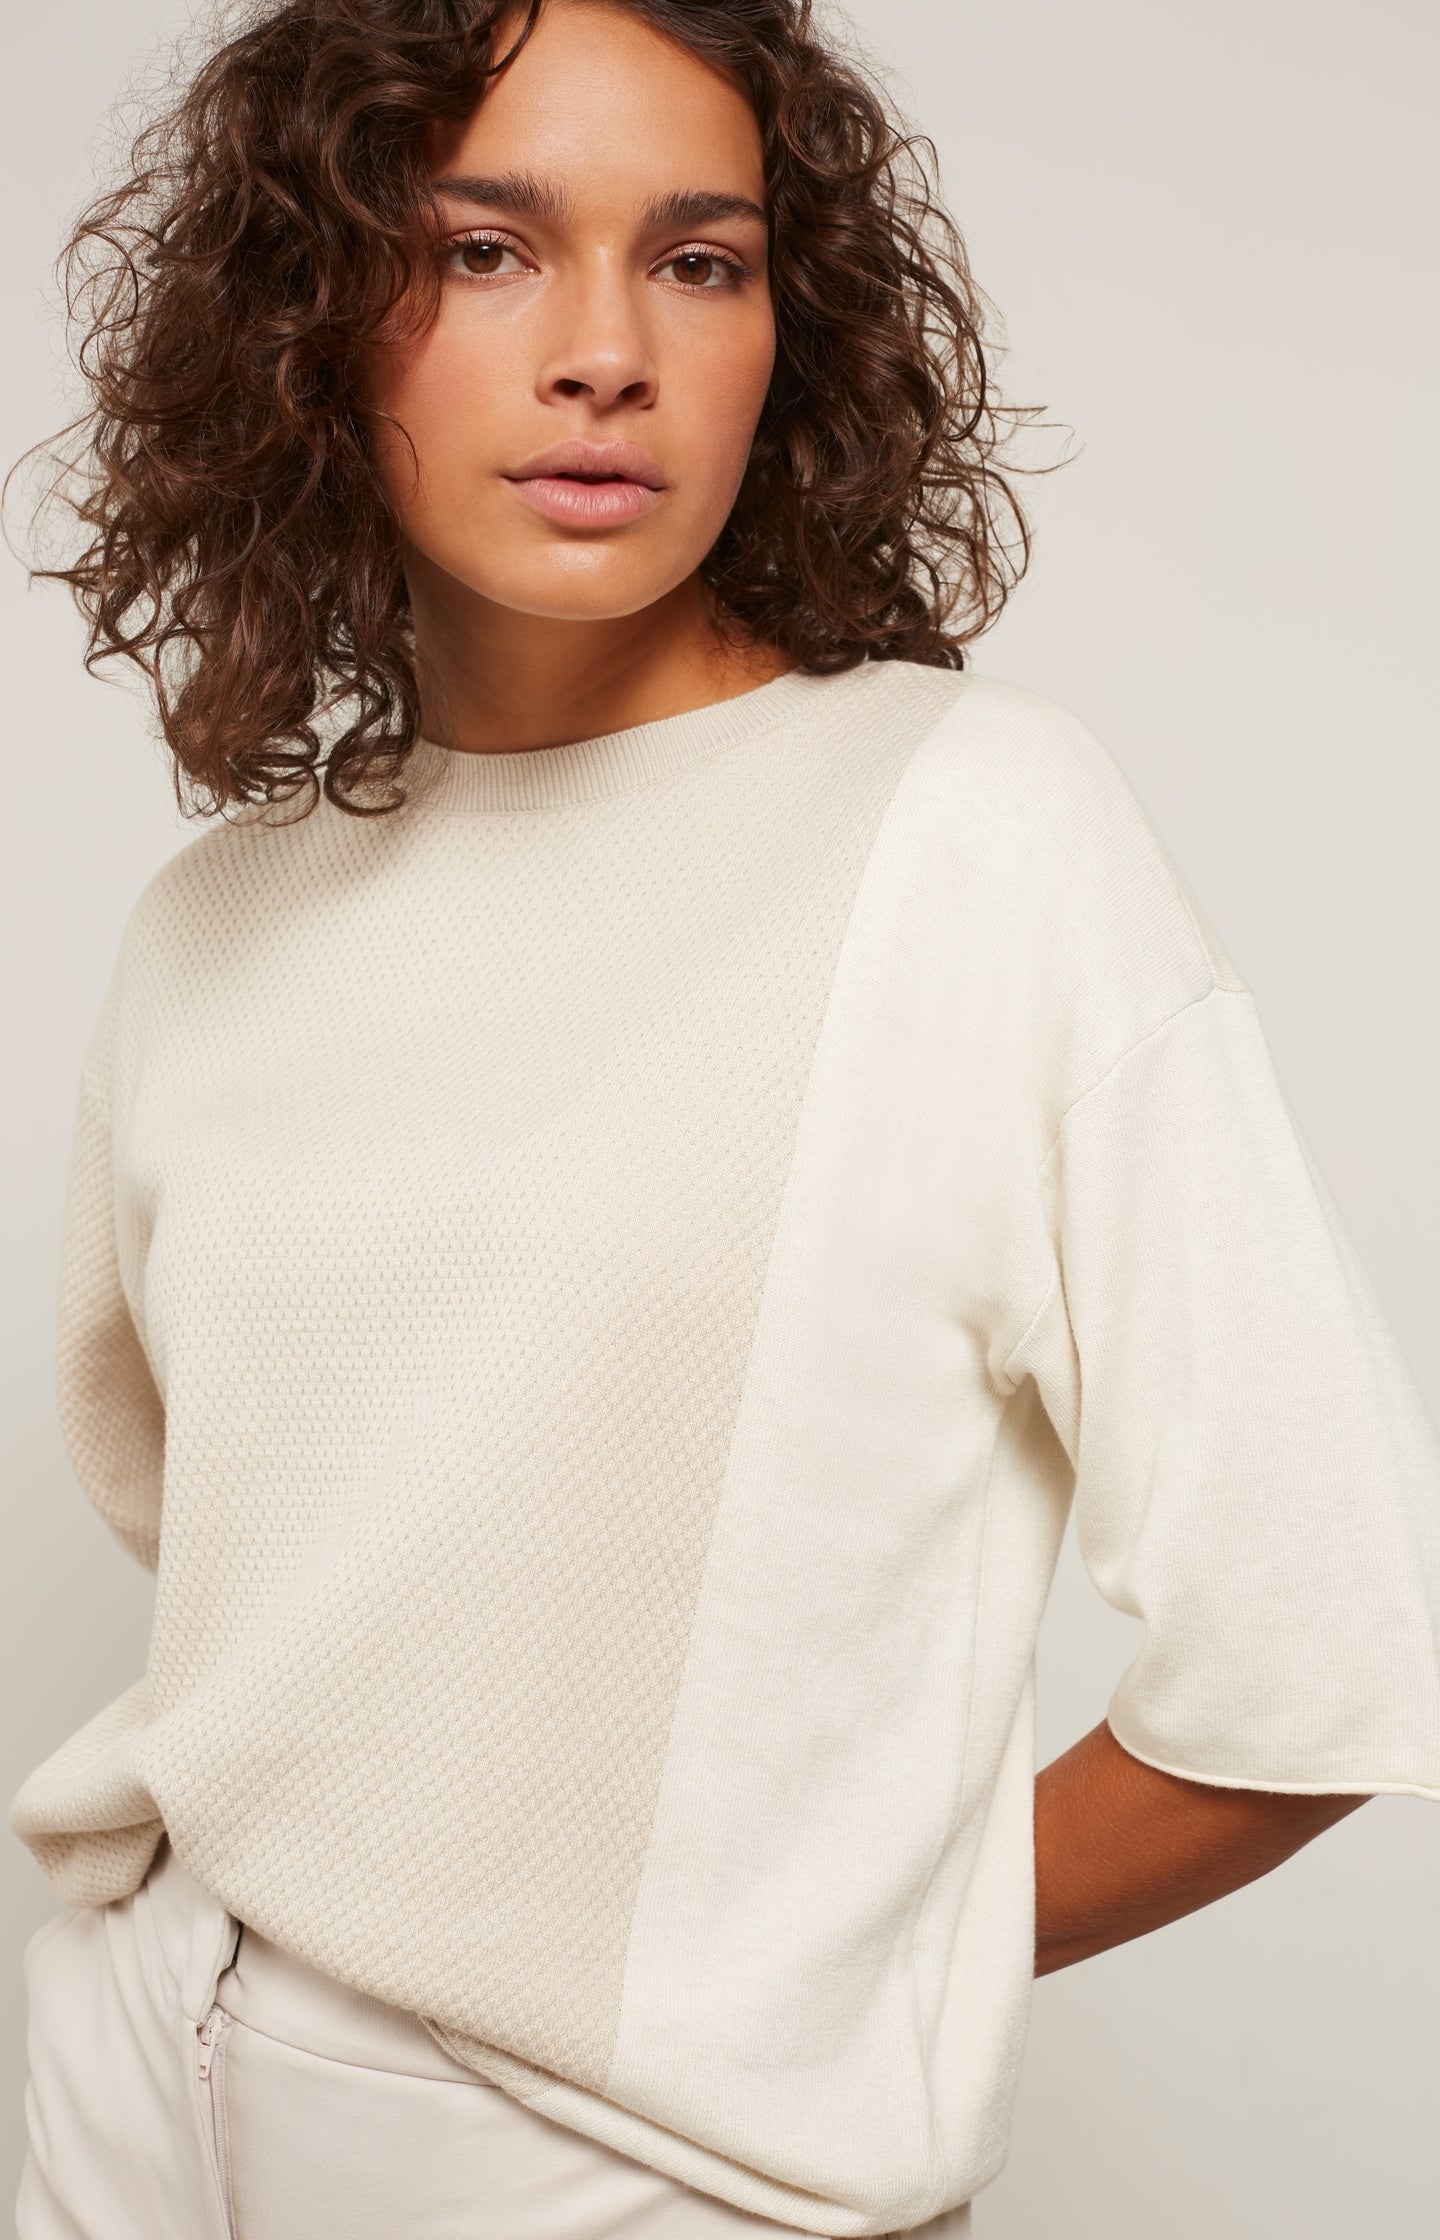 Colorblock sweater with round neck and mid-length sleeves